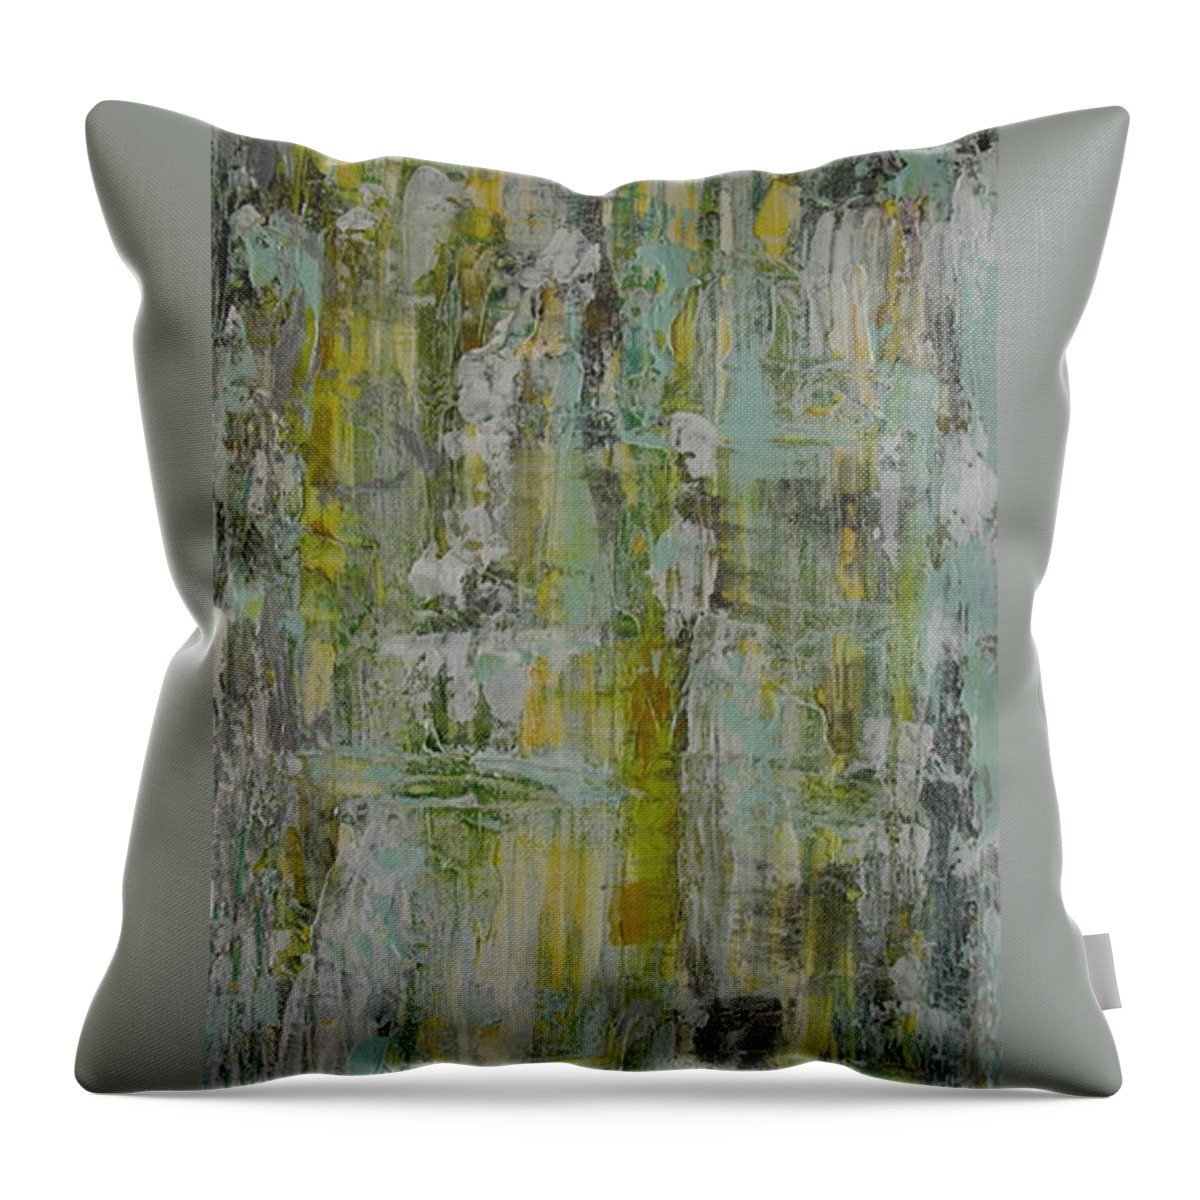 Abstract Painting Throw Pillow featuring the painting W21 - twice I by KUNST MIT HERZ Art with heart